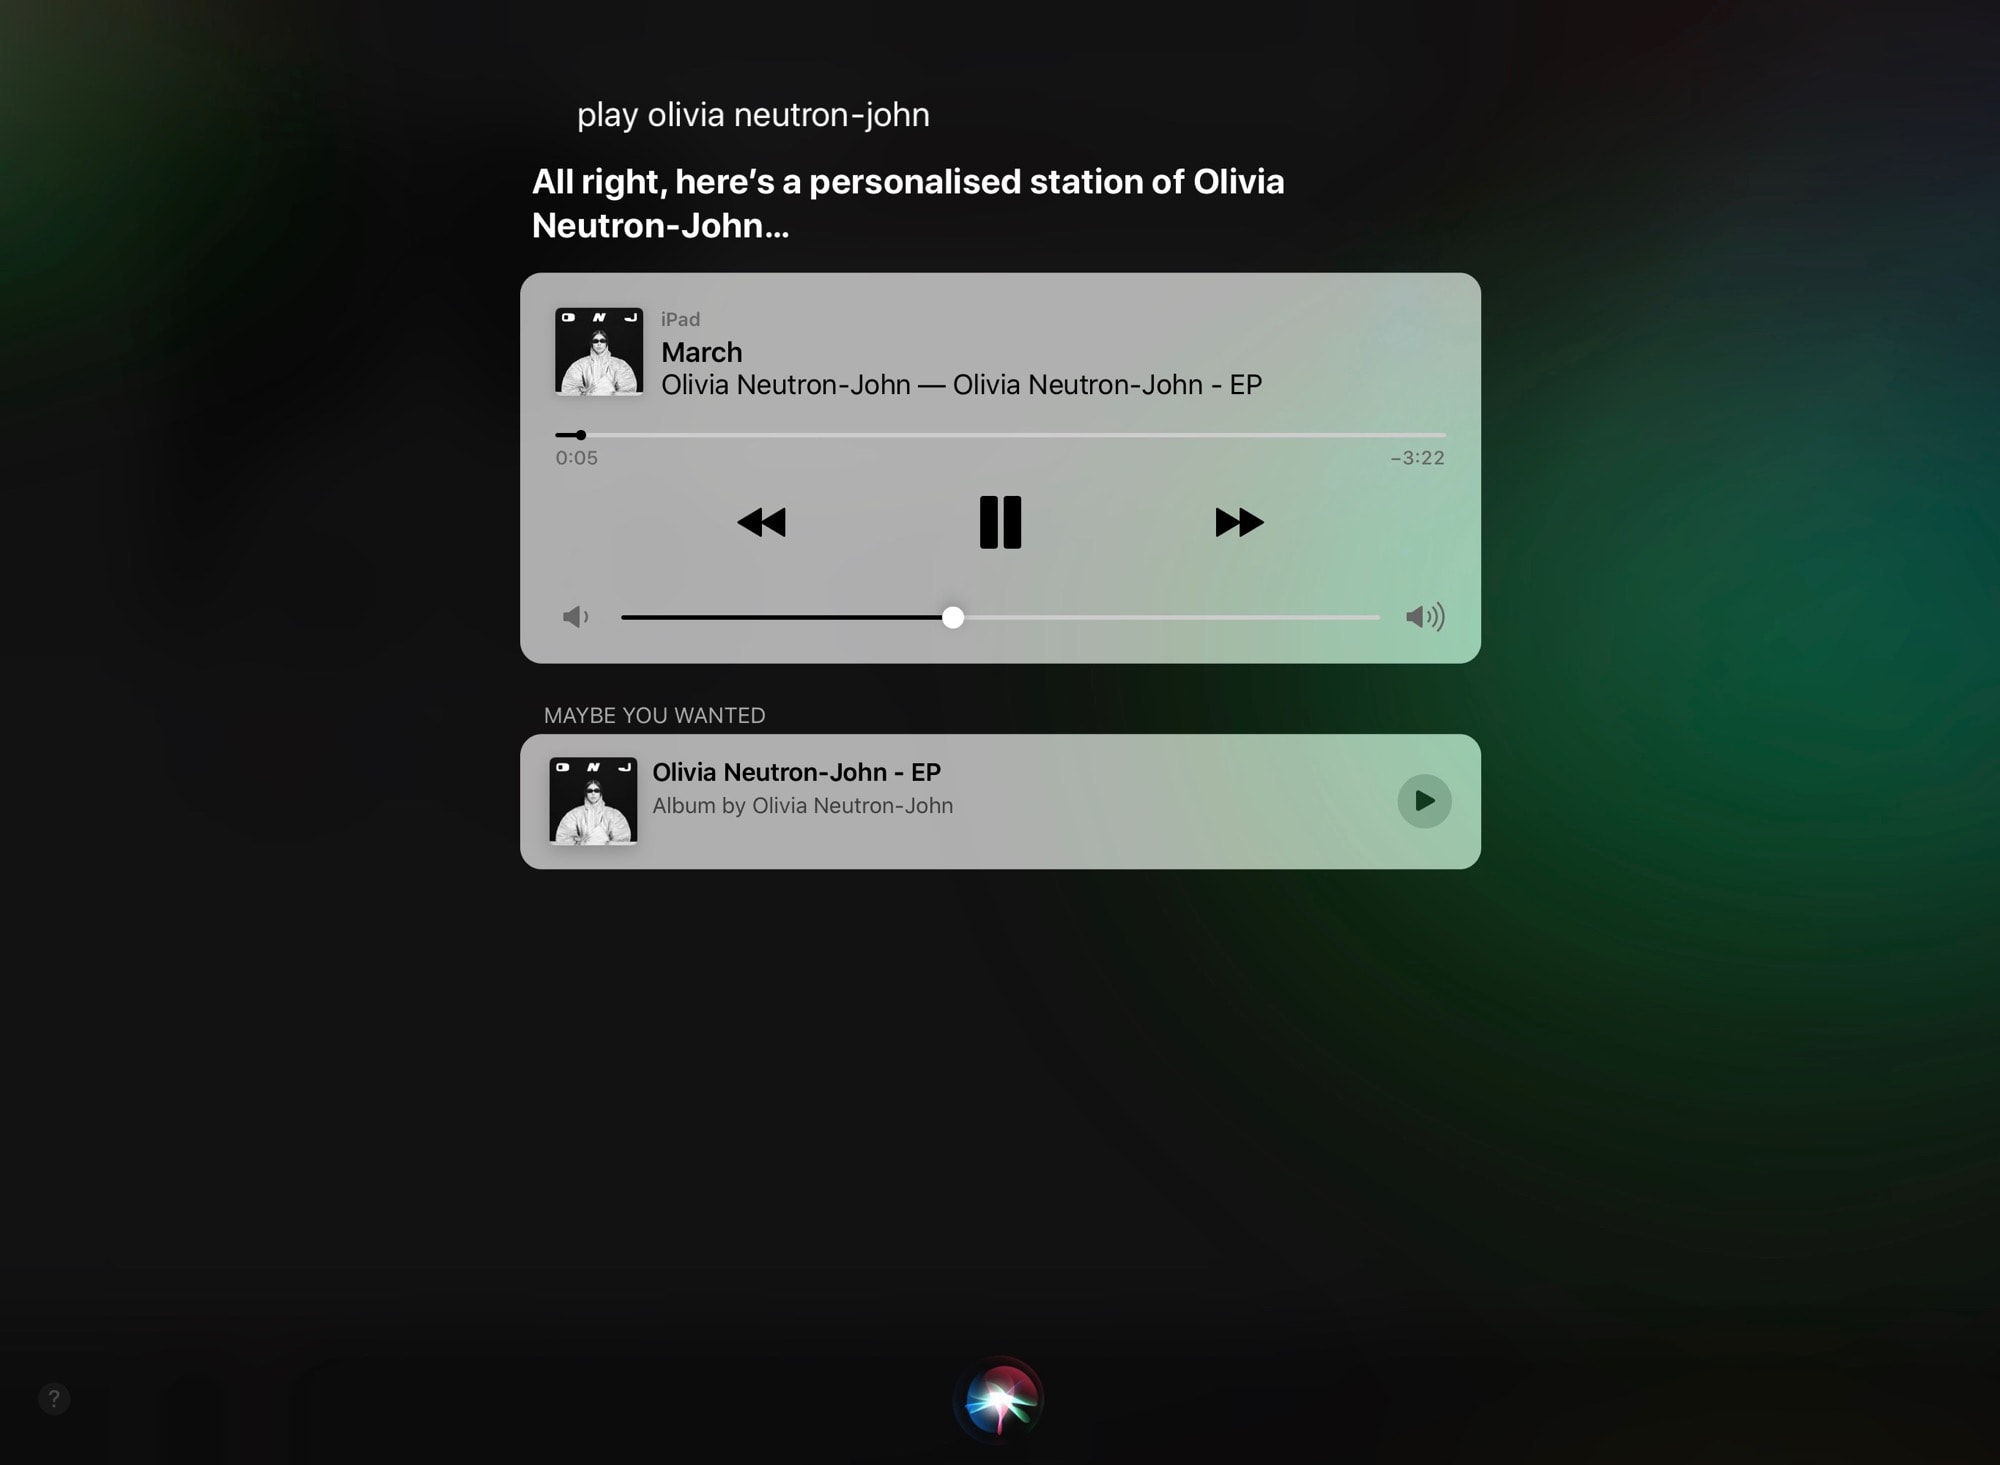 Siri plays your music, and even suggests alternatives.